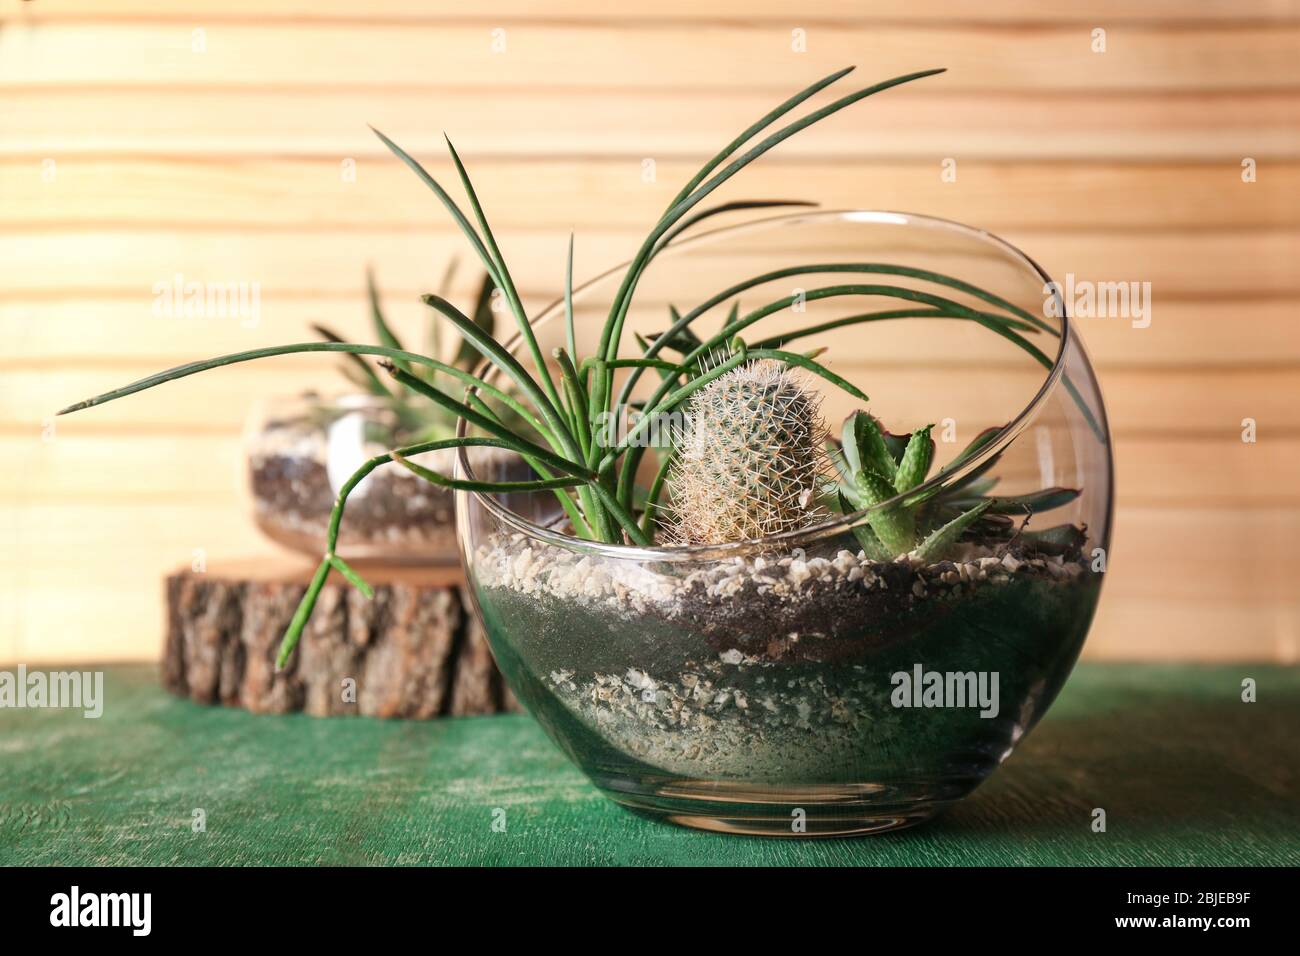 Florarium with succulents and cactus on wooden table Stock Photo